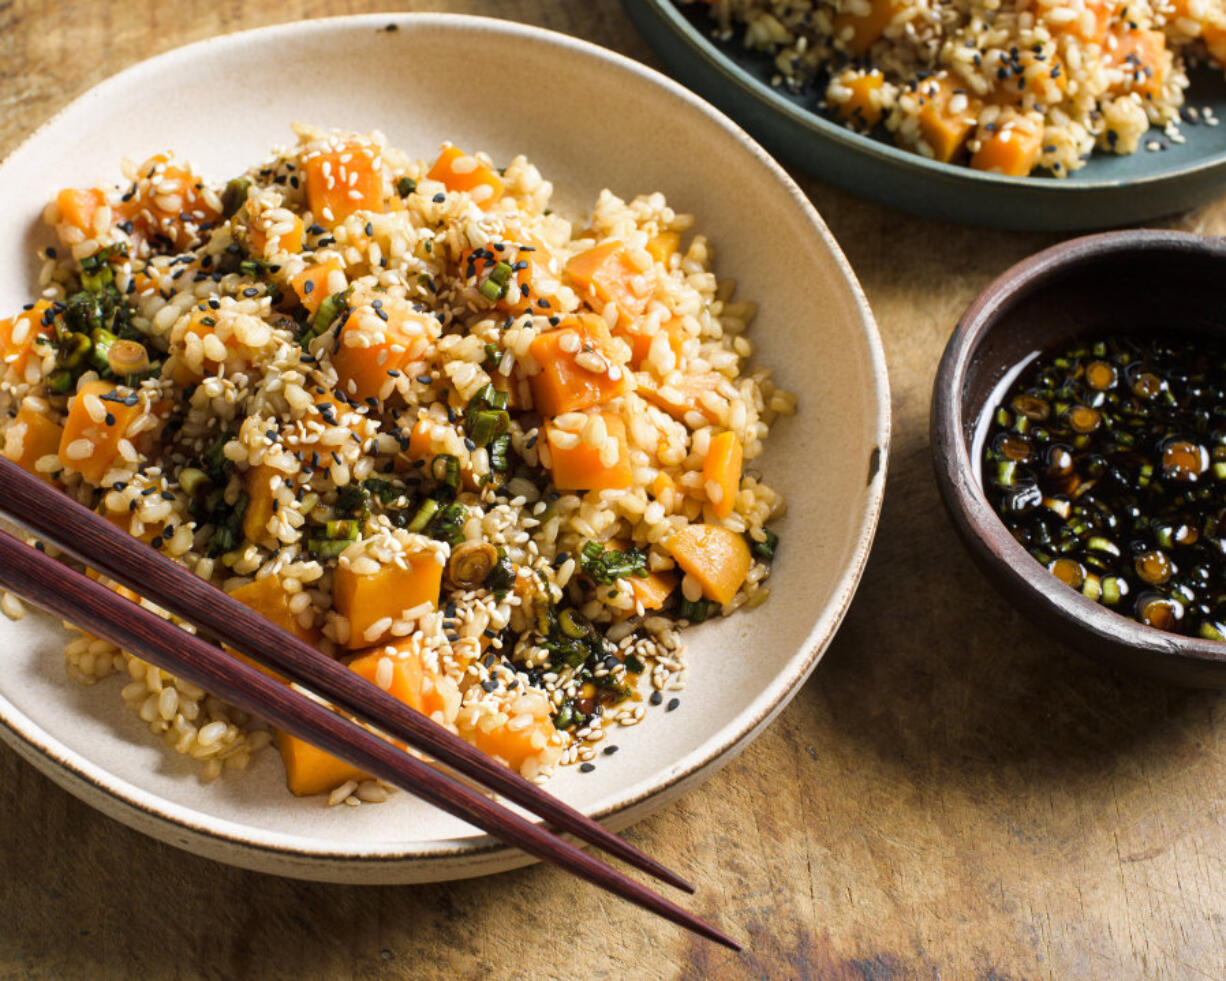 This image released by Milk Street shows a recipe for sweet potato brown rice with soy and scallions.